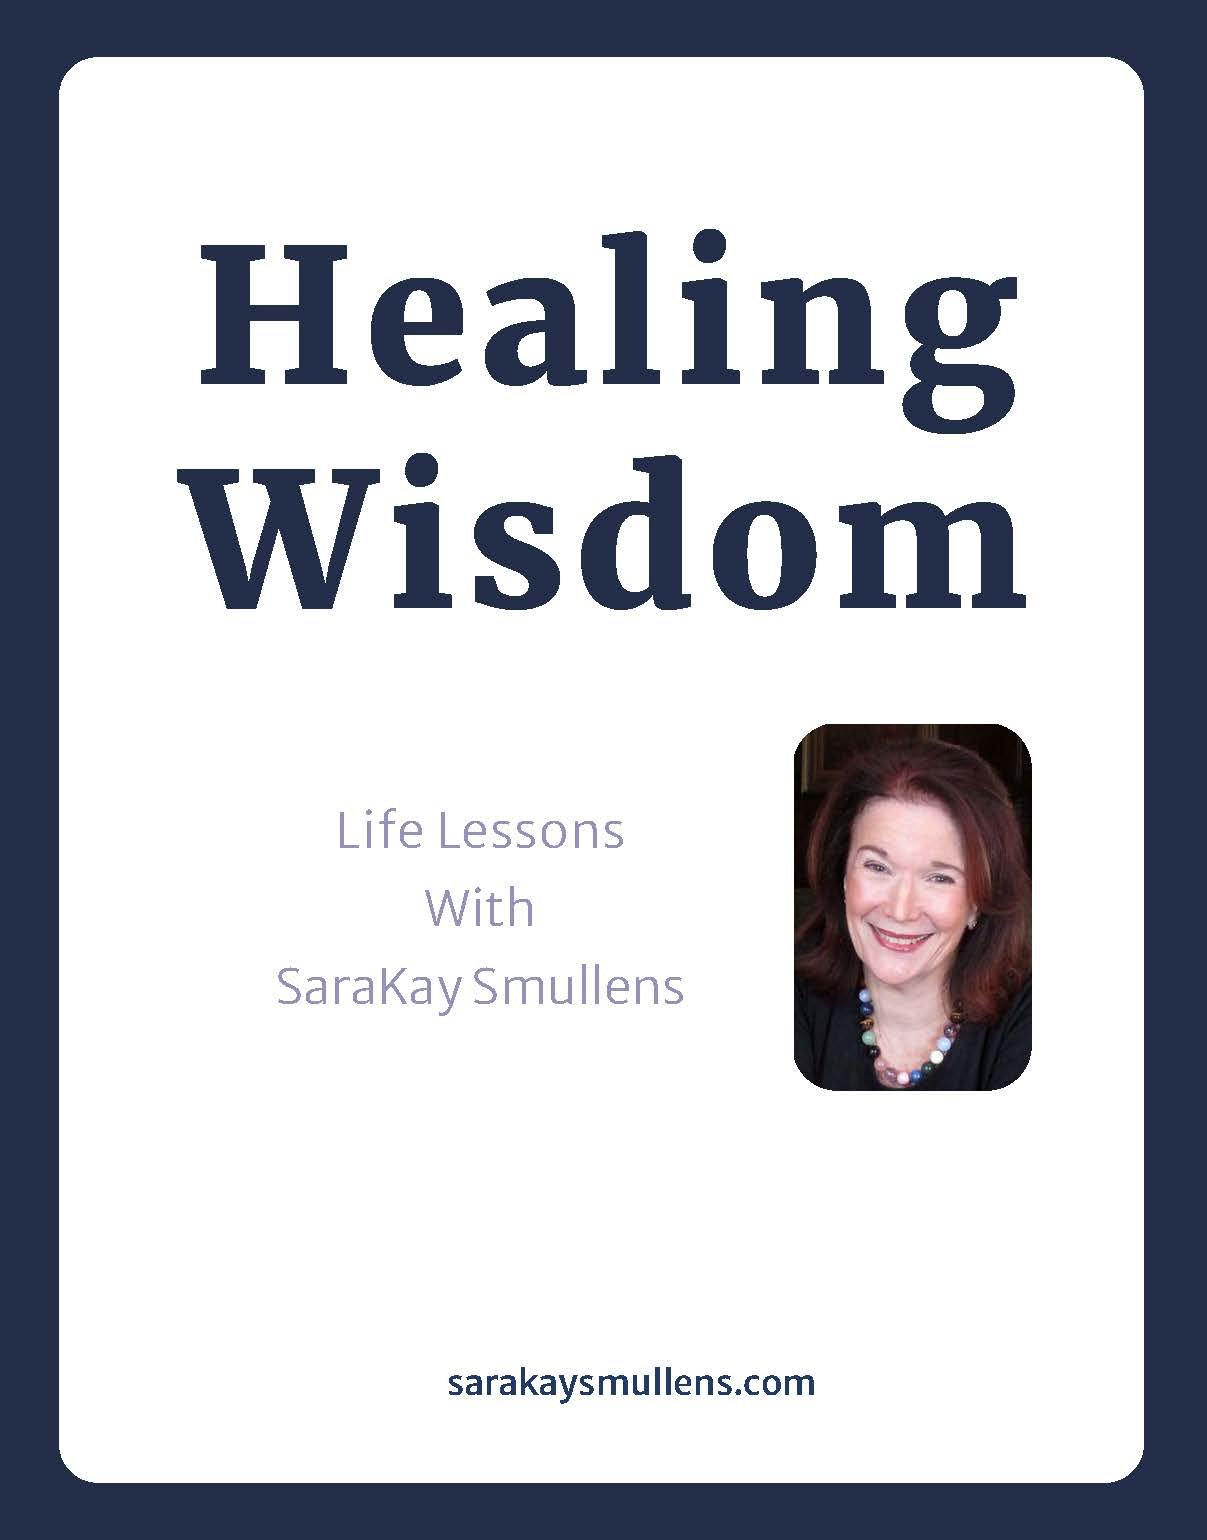 Healing-Wisdom-+Life-Lessons+With+SaraKay+Smullens-Feb.18th_Page_01.jpg